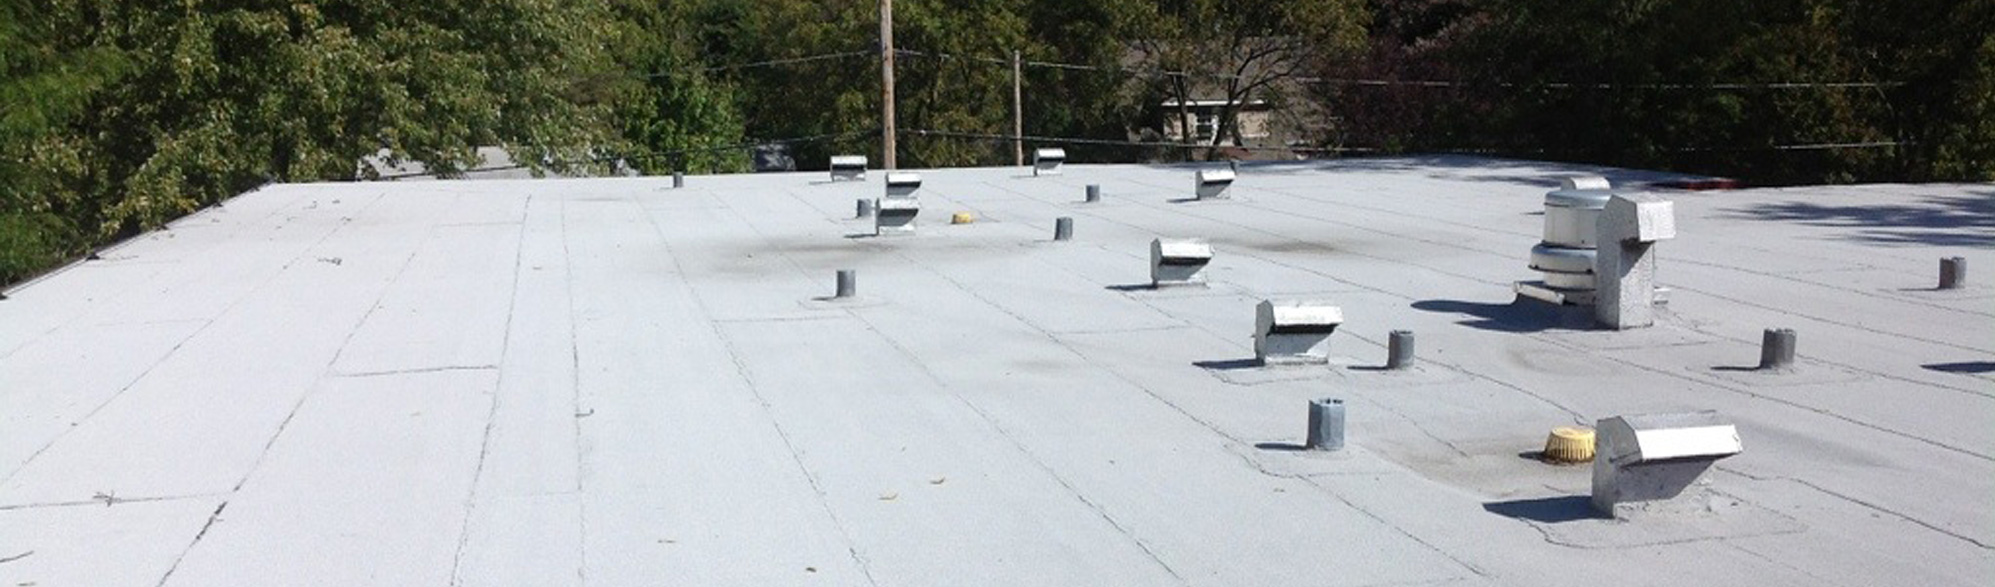 White Membrane Roofing Systems A1 Roofing Chicago